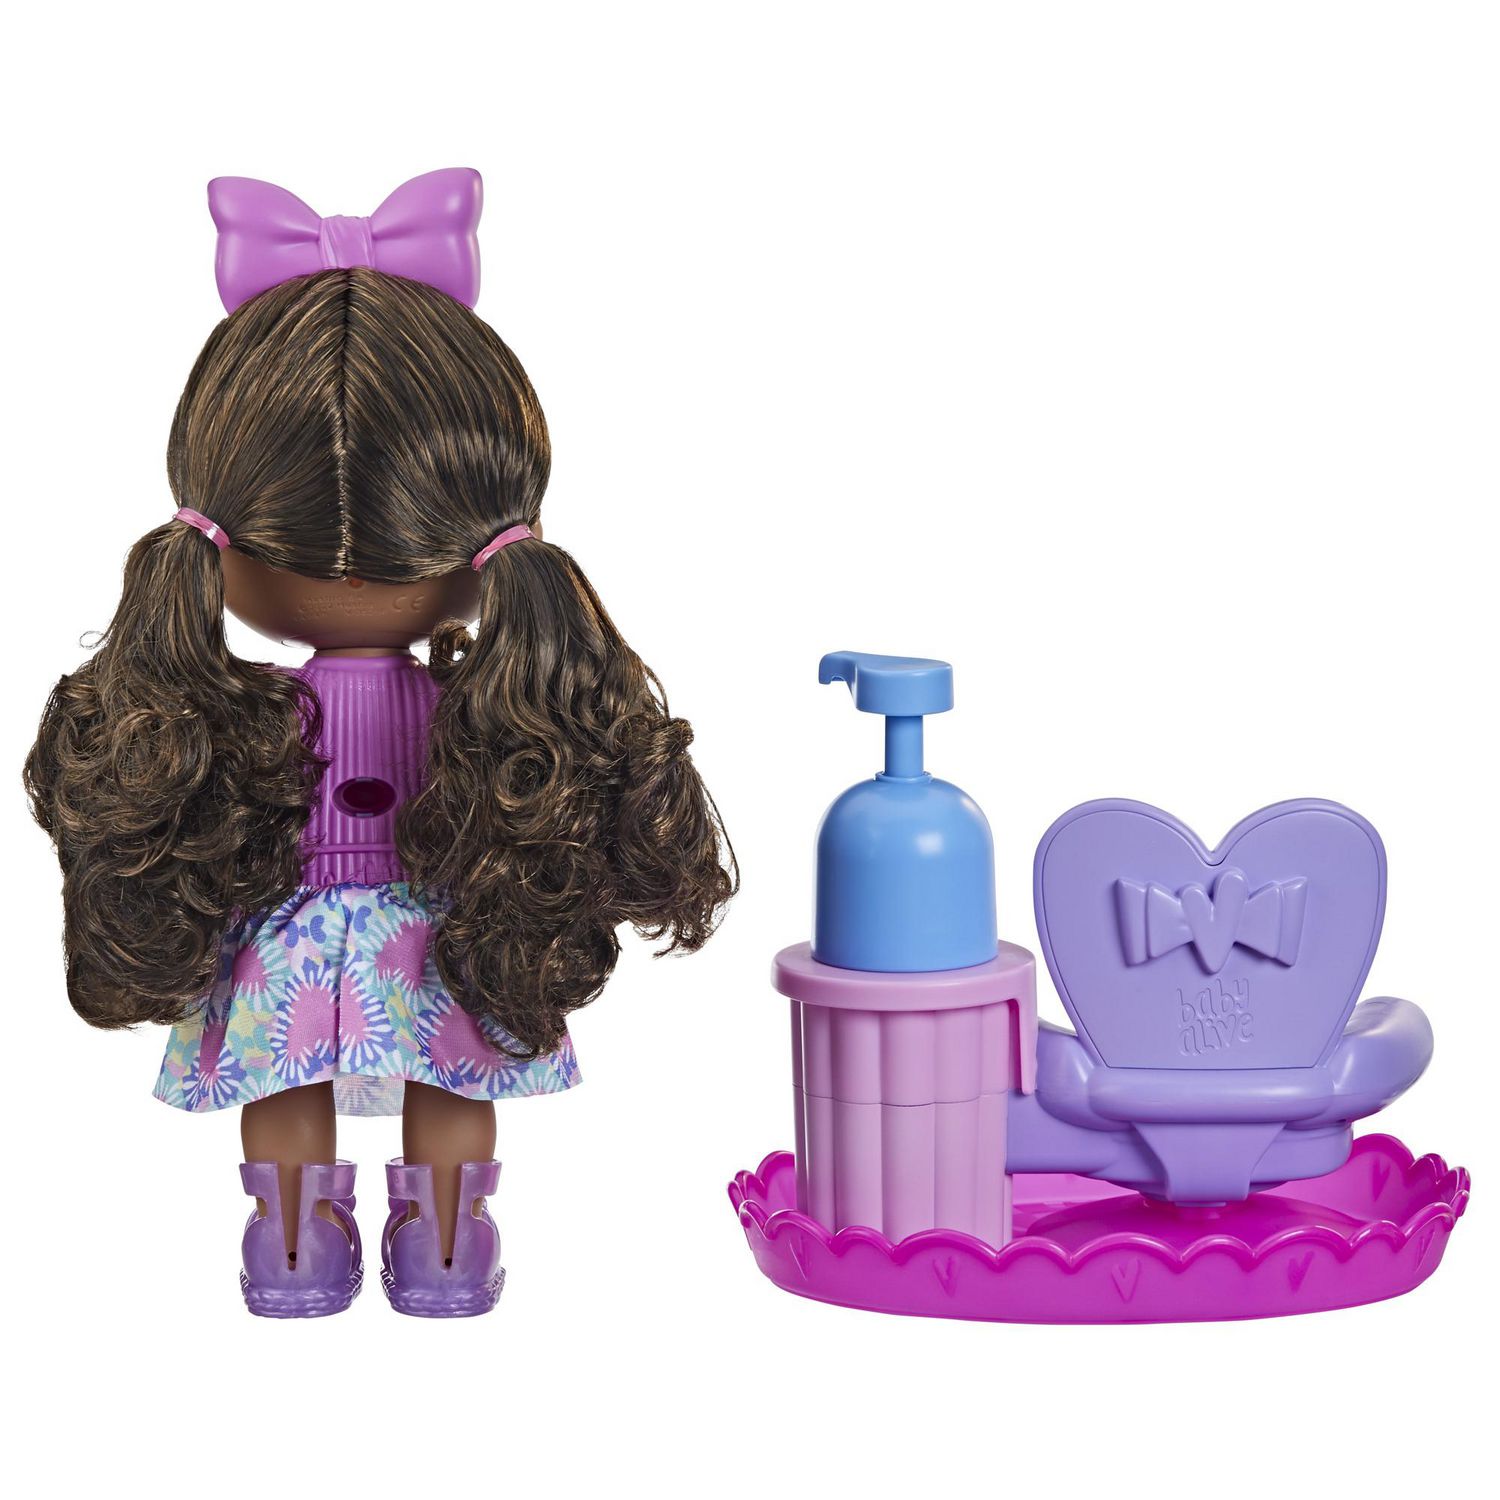 Baby Alive Sudsy Styling Doll, 12-Inch Toy for Kids Ages 3 and Up